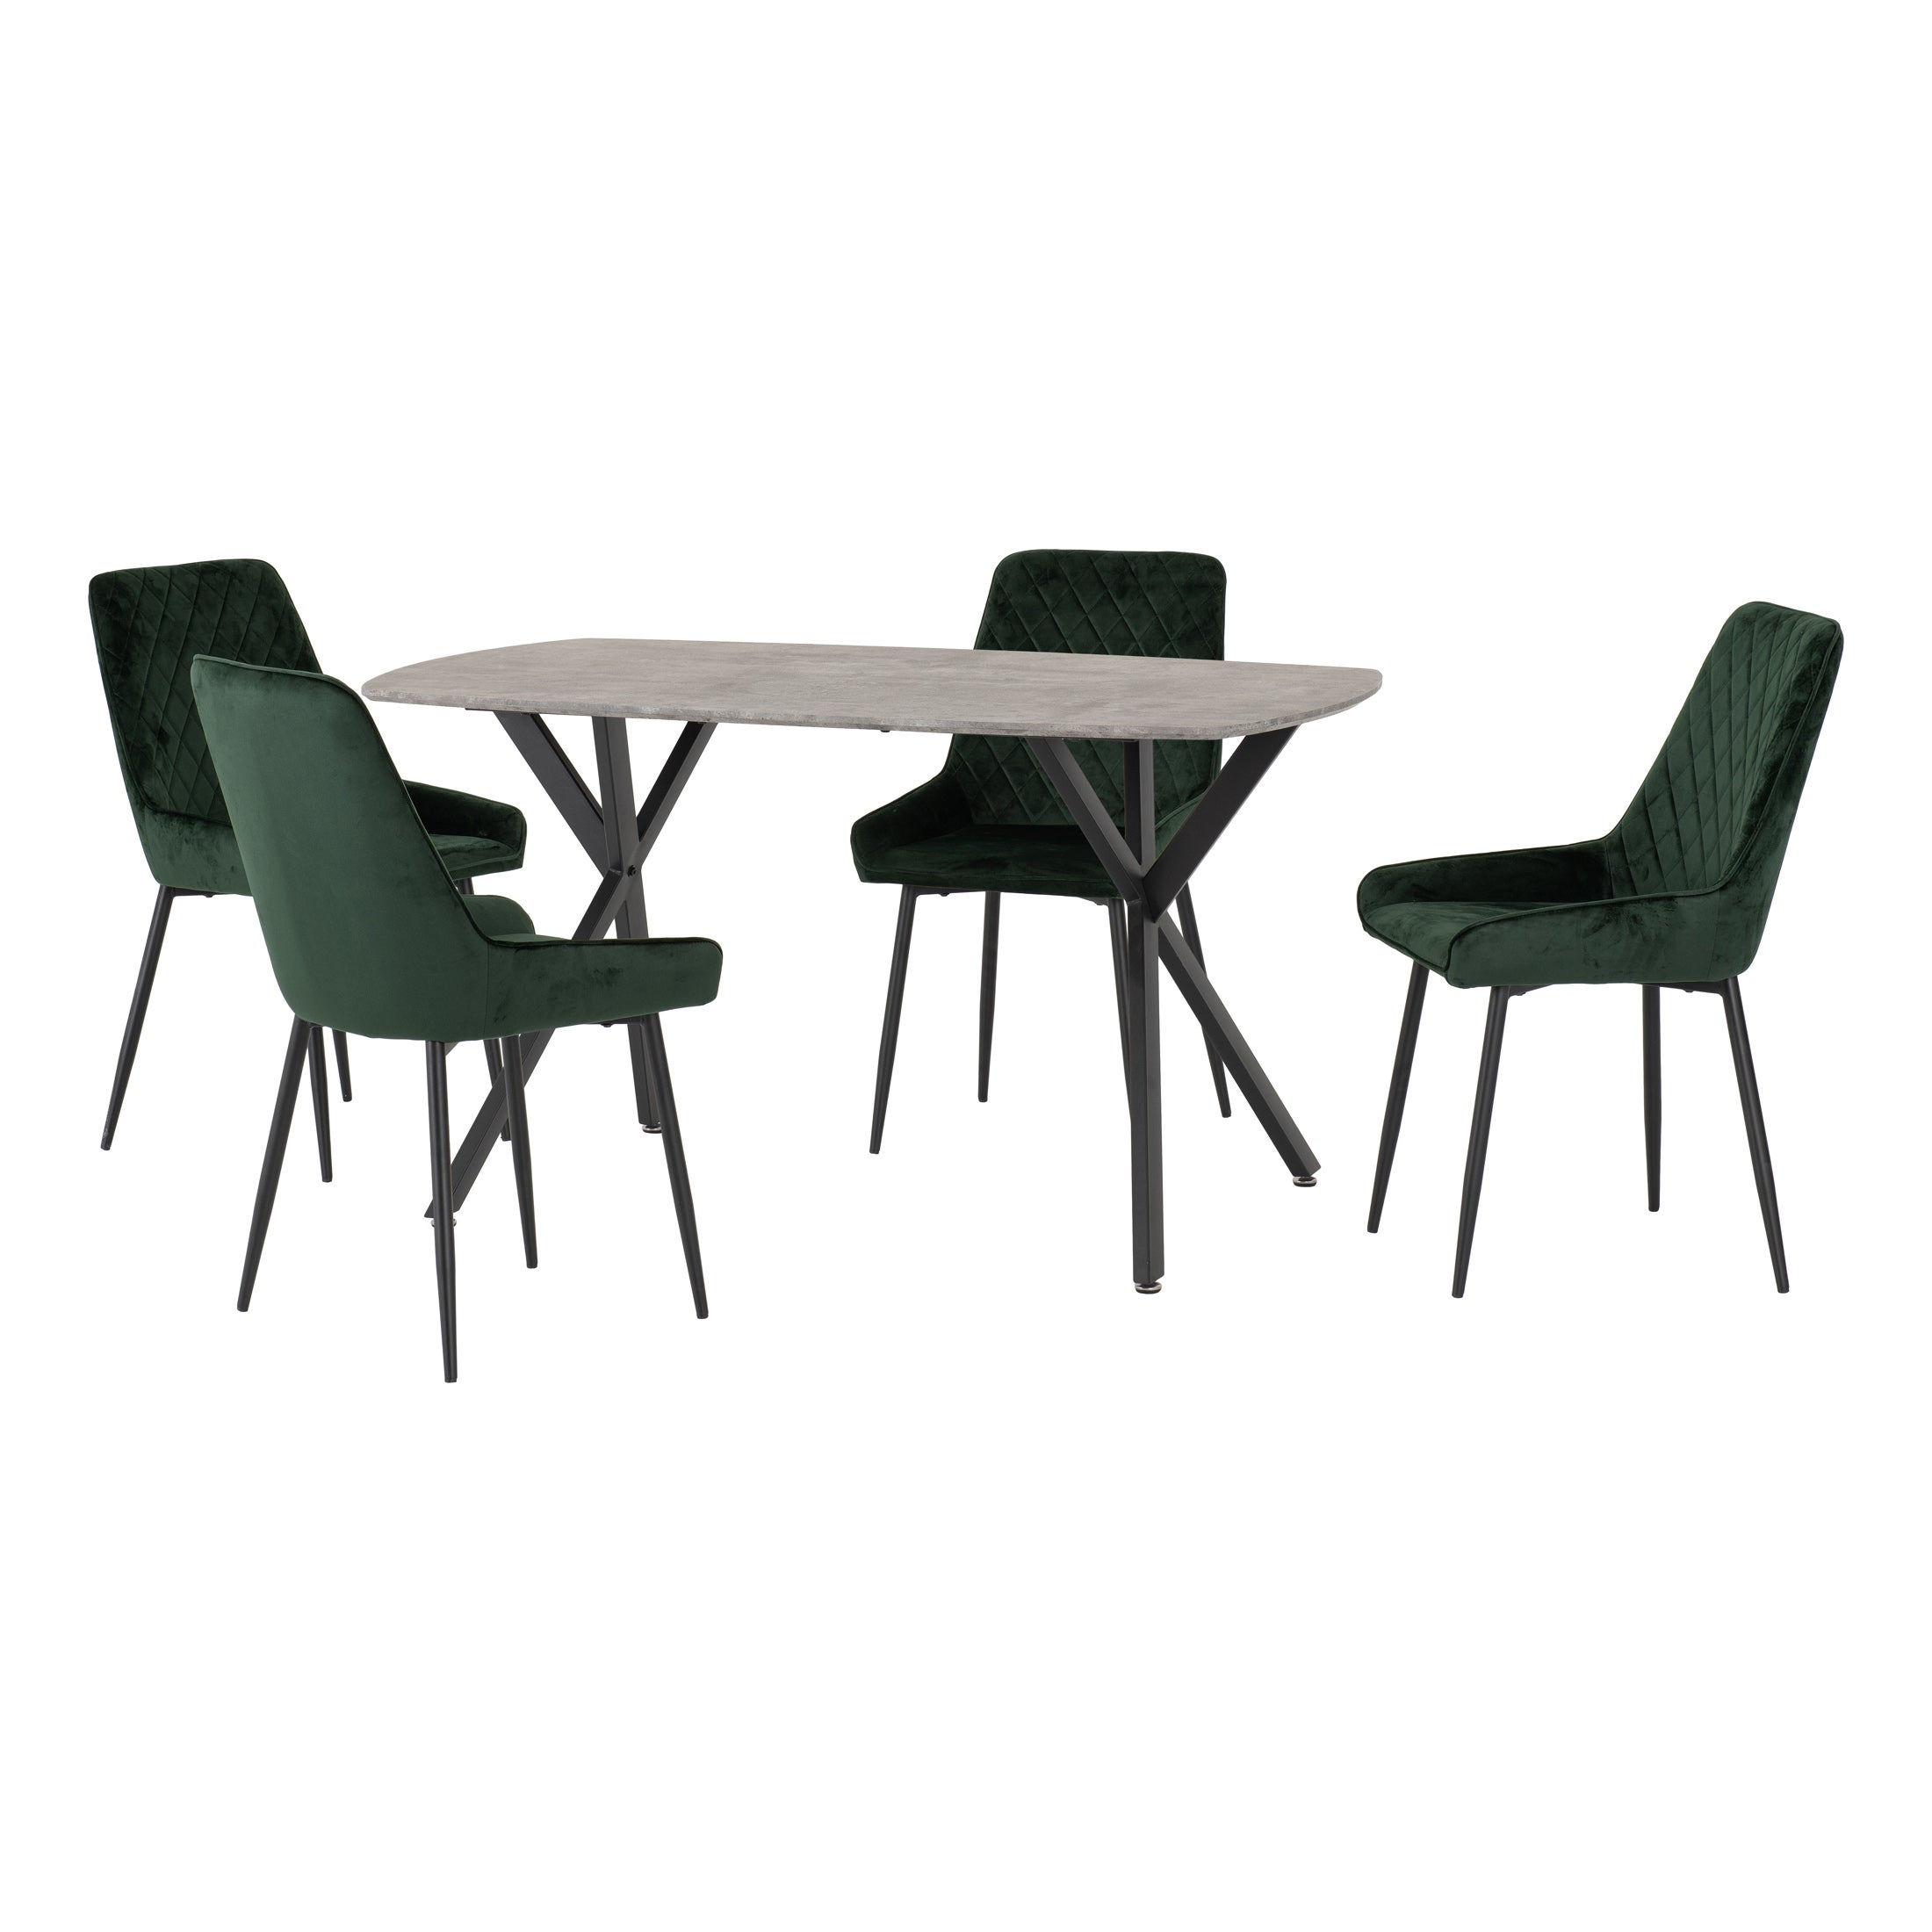 Athens Rectangular Dining Table With 4 Avery Chairs Concrete Effect Green